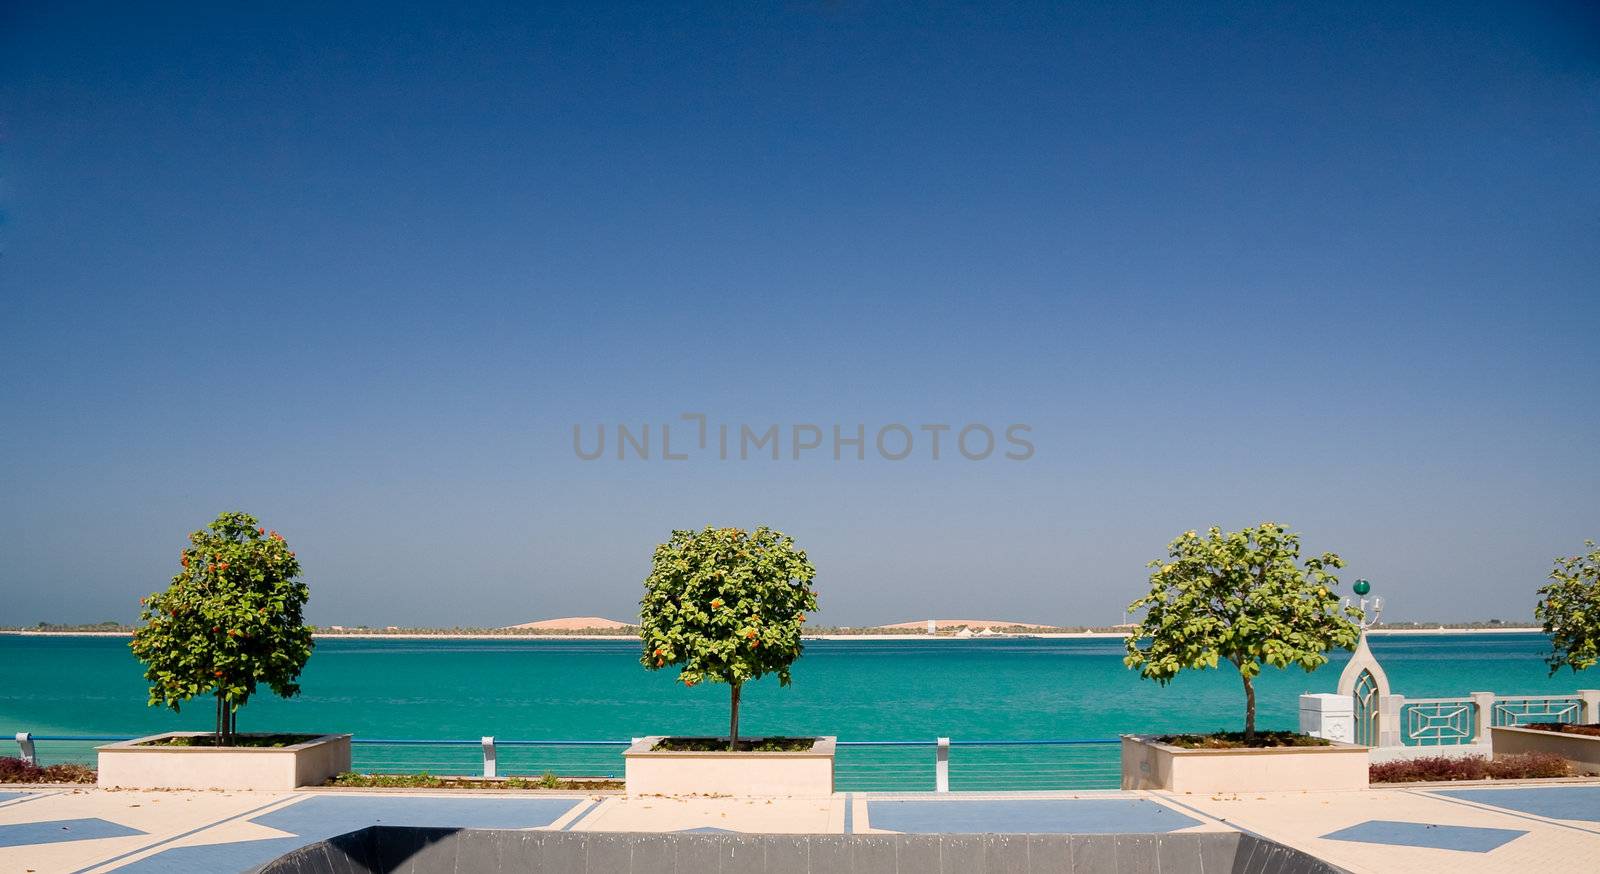 View of the Gulf of the coast of Abu Dhabi framed by a trio of trees